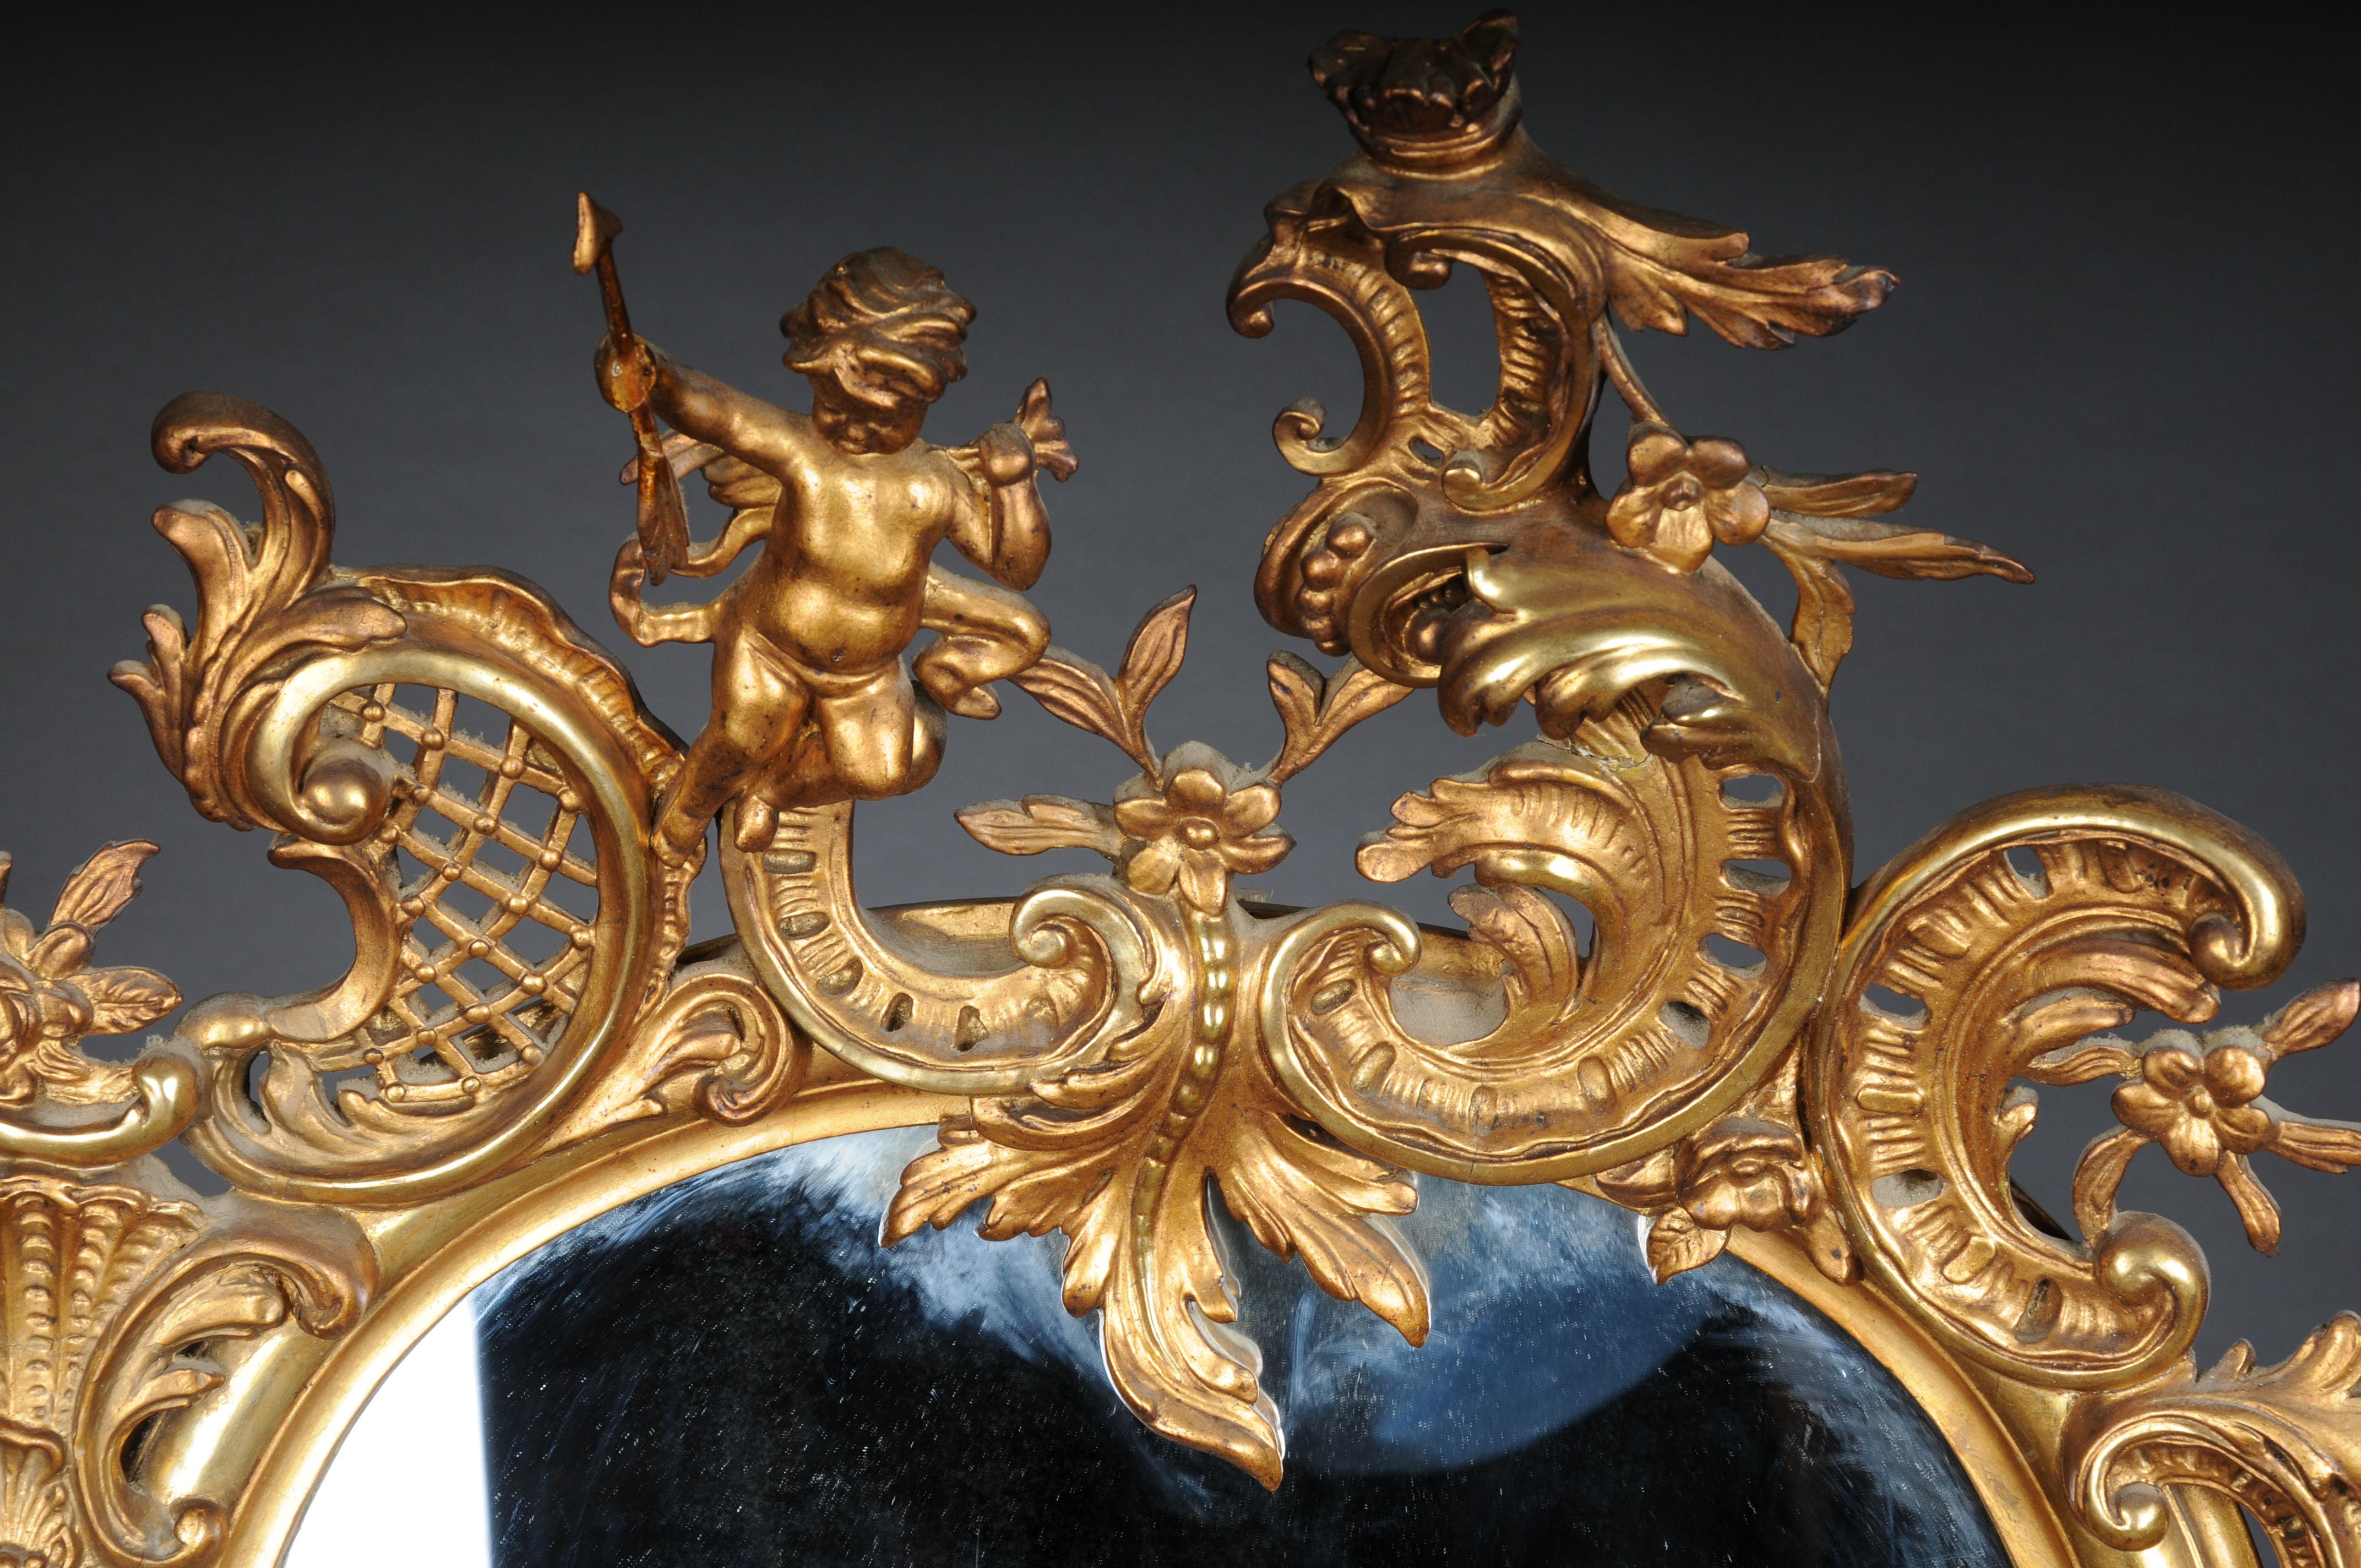 Antique gilded Rococo wall mirror

Rich ornate mirror frame, crowned with a diamond shield with putti.
